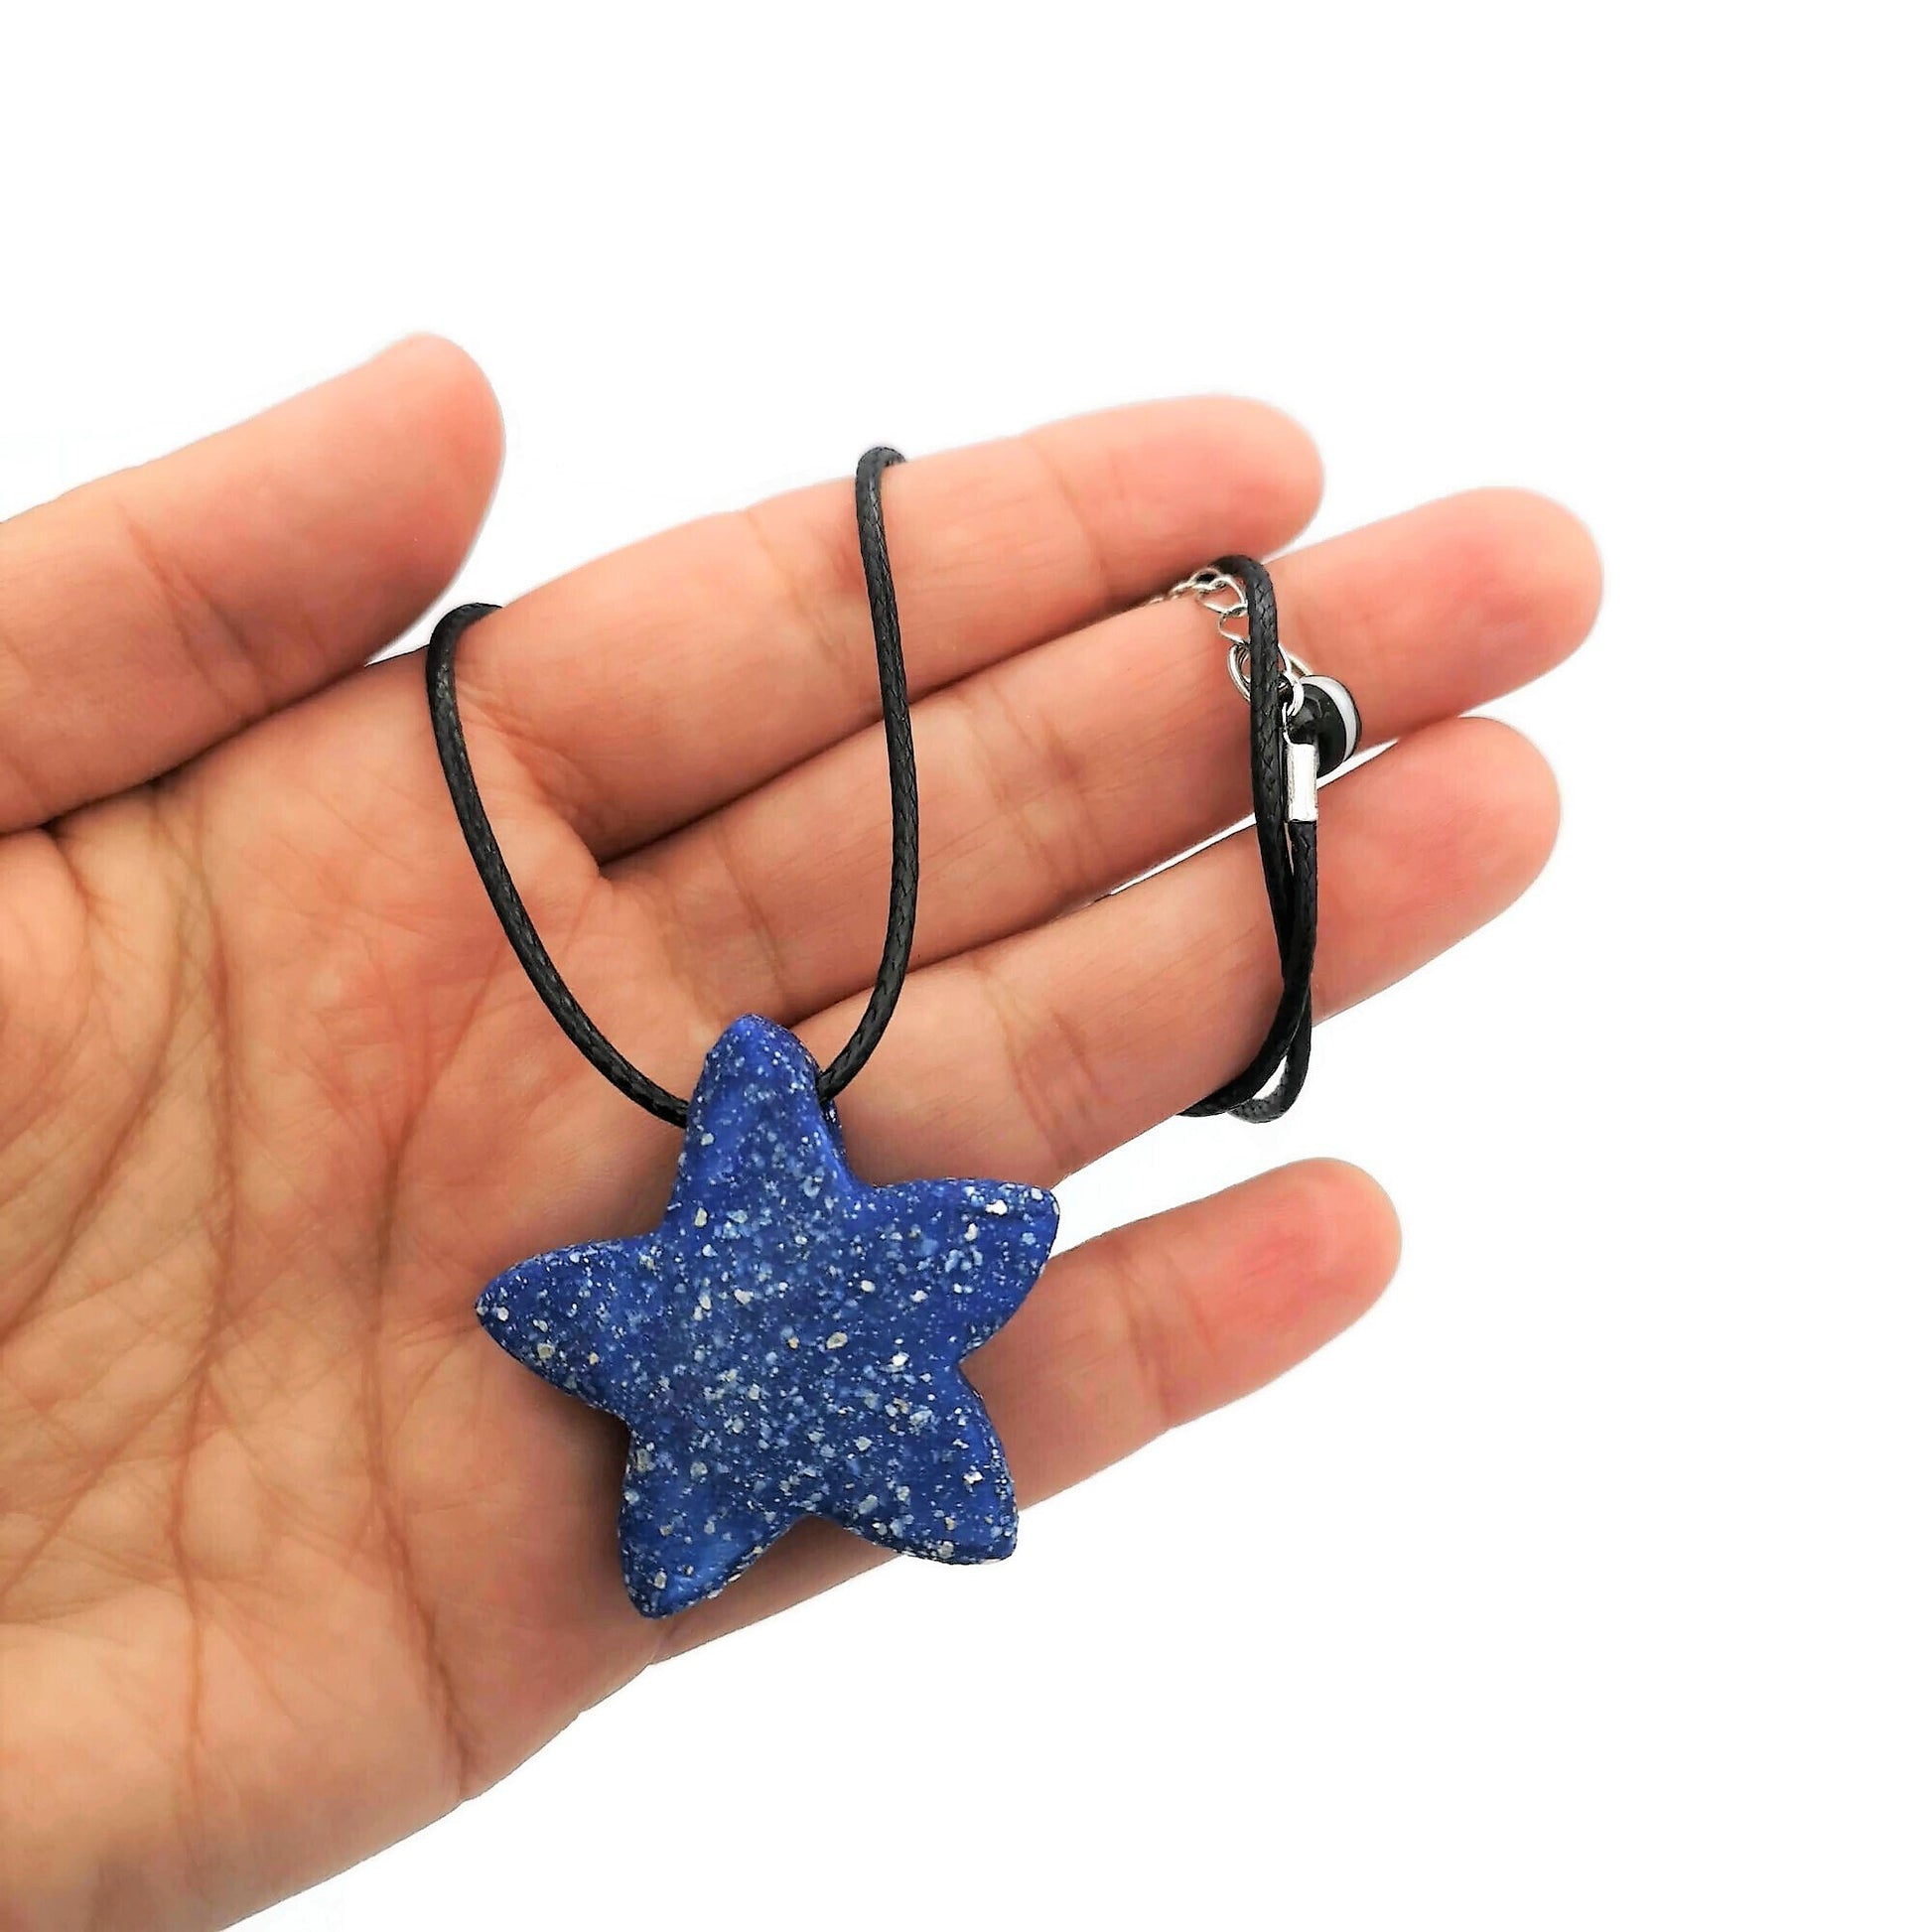 EVERYDAY NECKLACE PENDANT, Statement Star Necklace Boho Clay Necklace, Best Pendant Necklace For Her, Cute Mother Day Gift From Daughter - Ceramica Ana Rafael